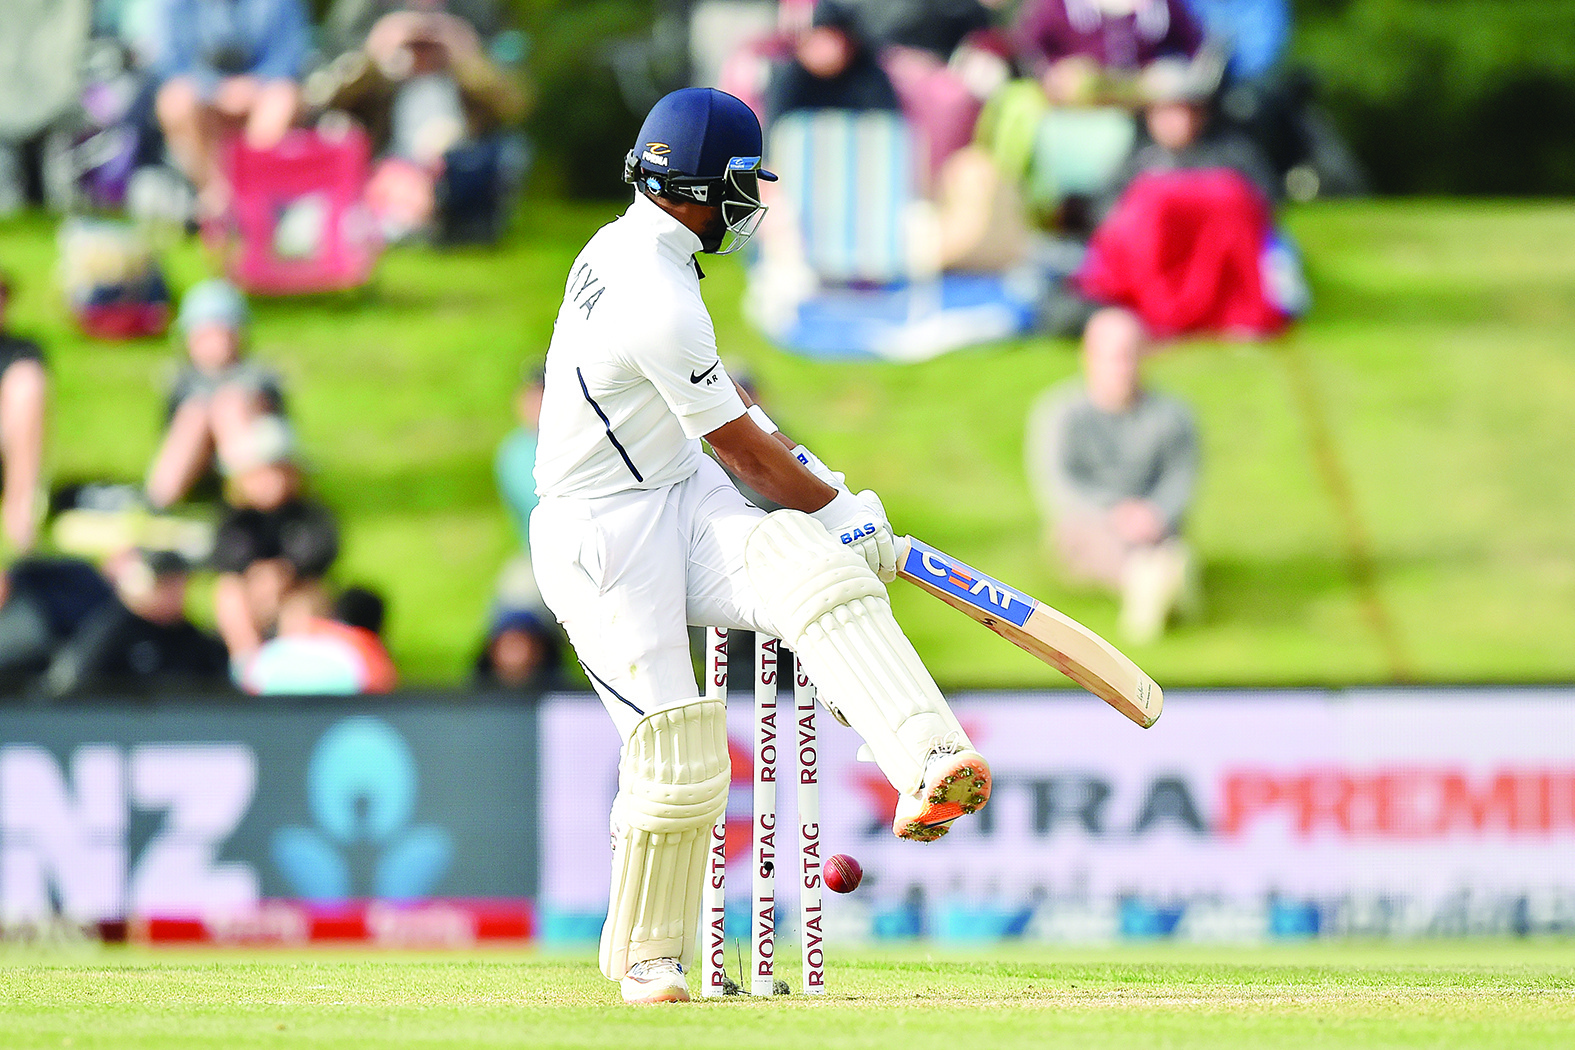 India's Cheteshwar Pujara is clean-bowled on day two of the second Test cricket match between New Zealand and India at the Hagley Oval in Christchurch on March 1, 2020. (Photo by PETER PARKS / AFP)